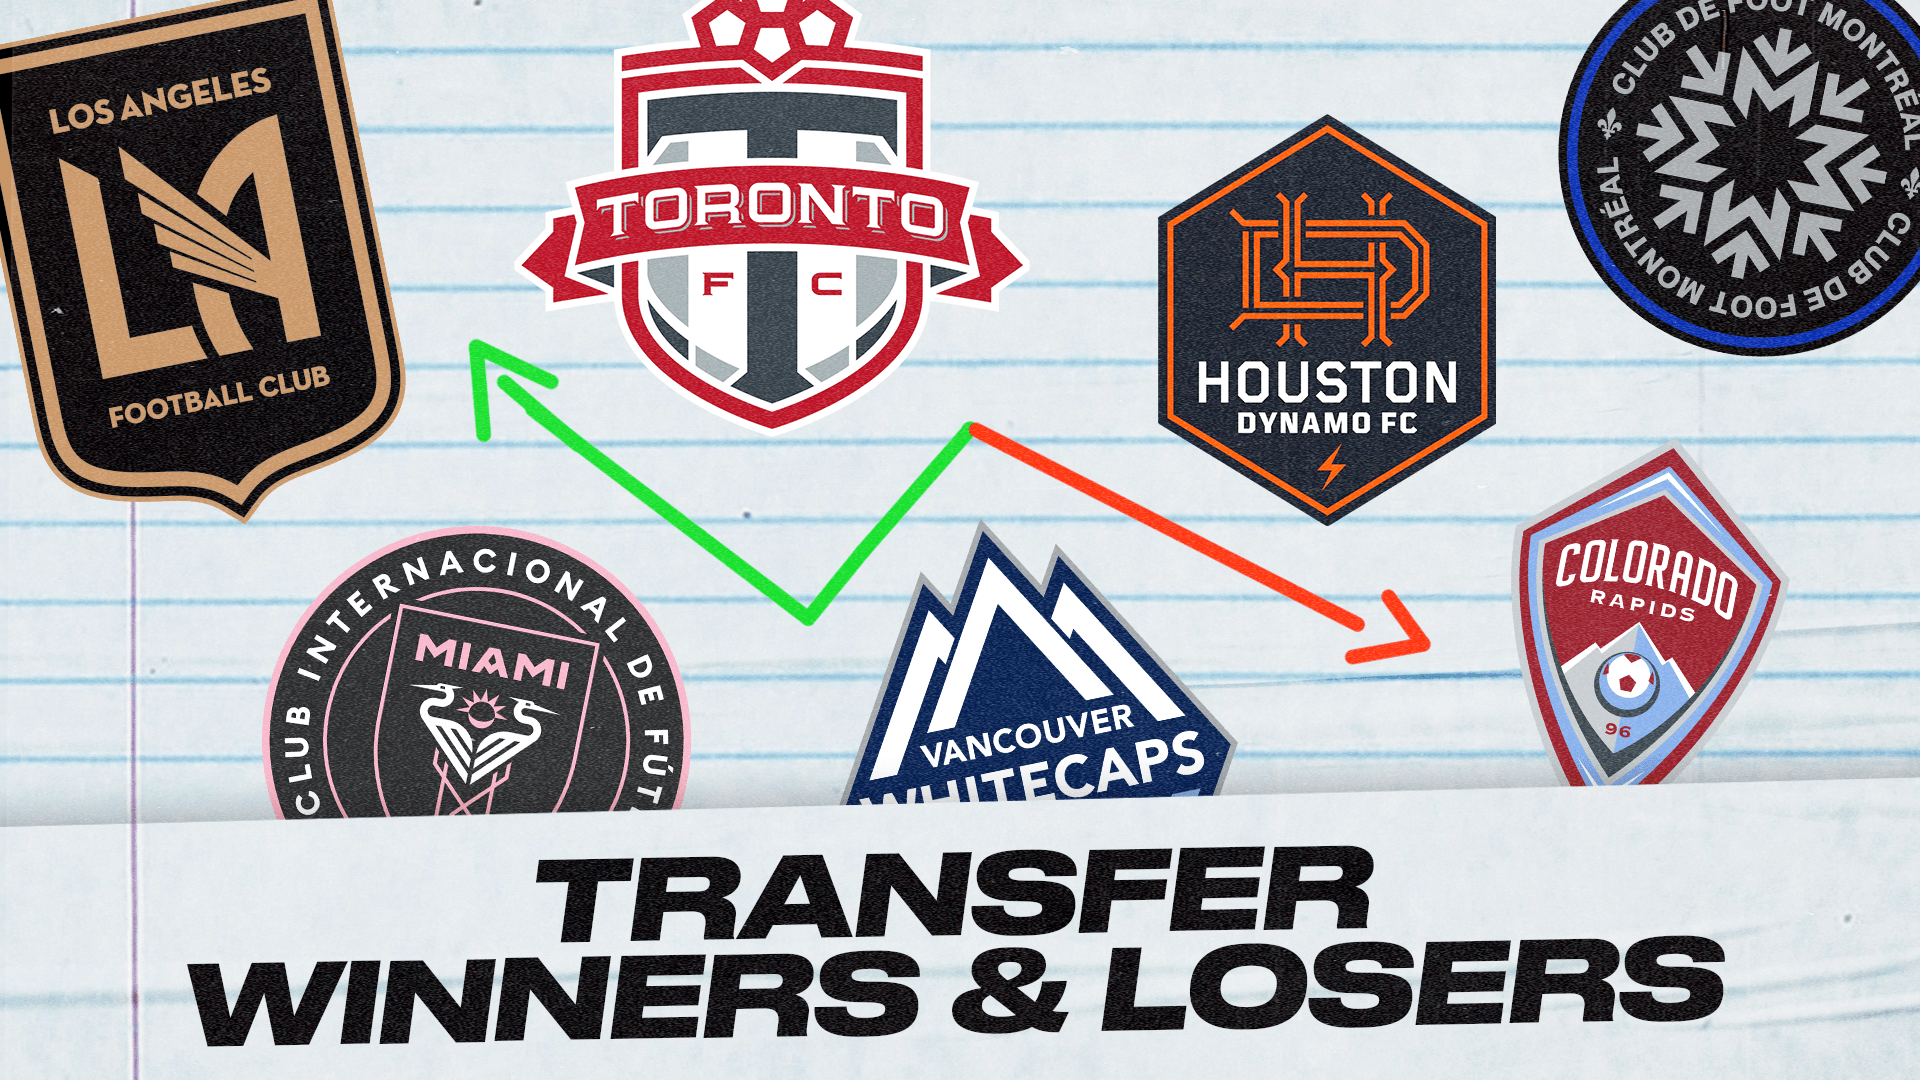 Winners and losers from the MLS Secondary Transfer Window | MLSSoccer.com - MLSsoccer.com